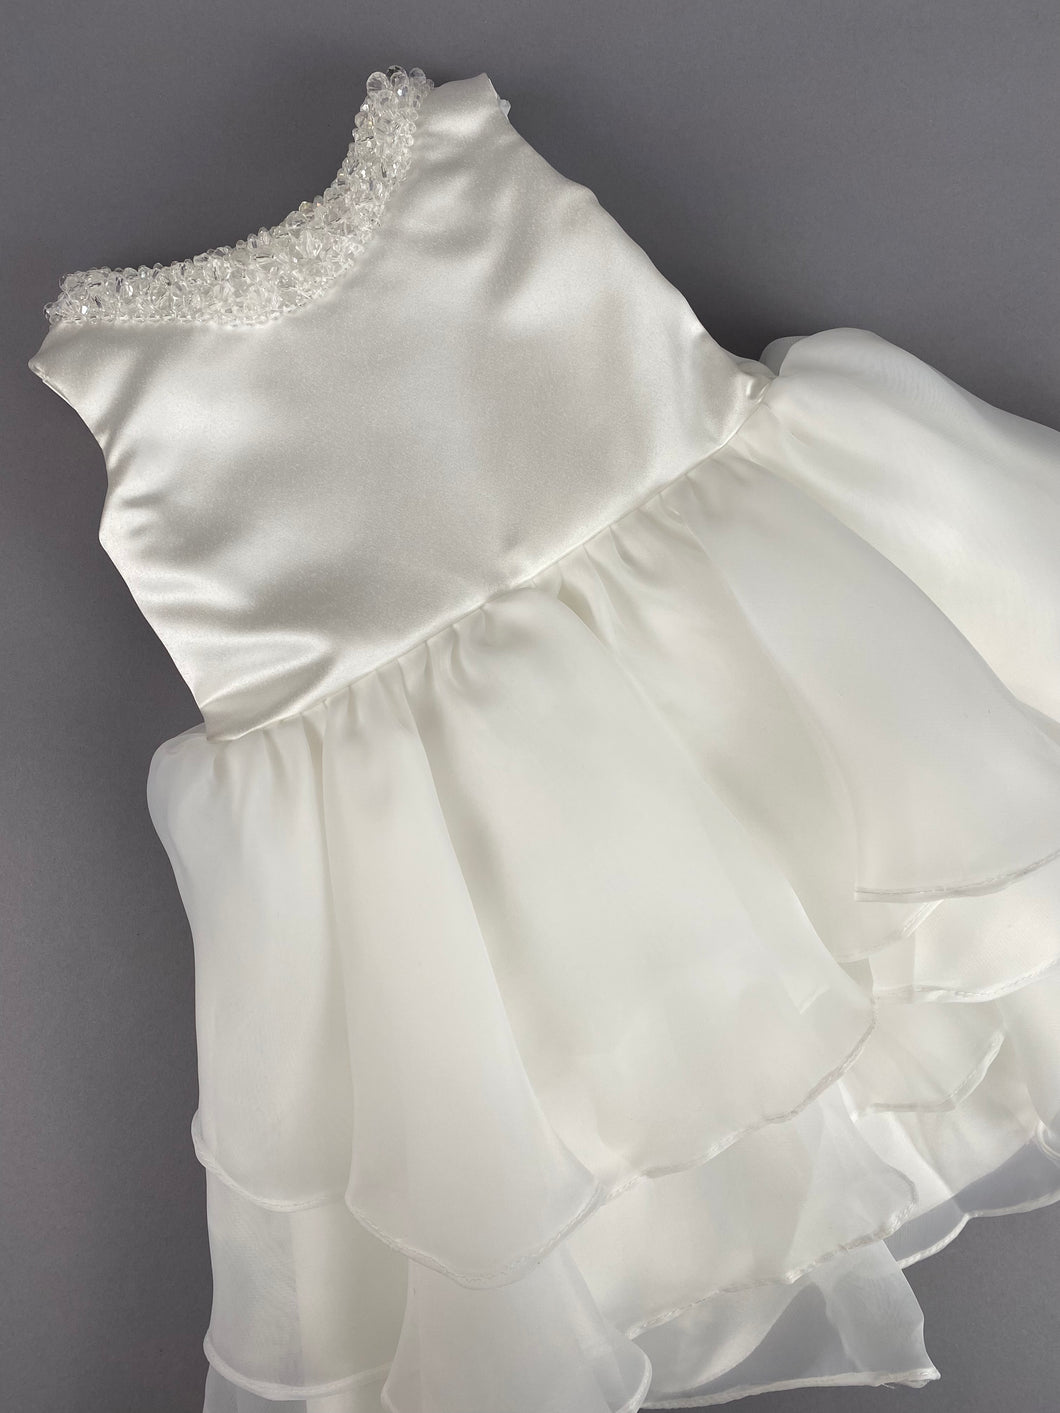 Dress 104 Girls Baptismal Christening  Sleeveless Satin Top Dress  with Crystal Neckline. Made  exclusively for Rosies Collections